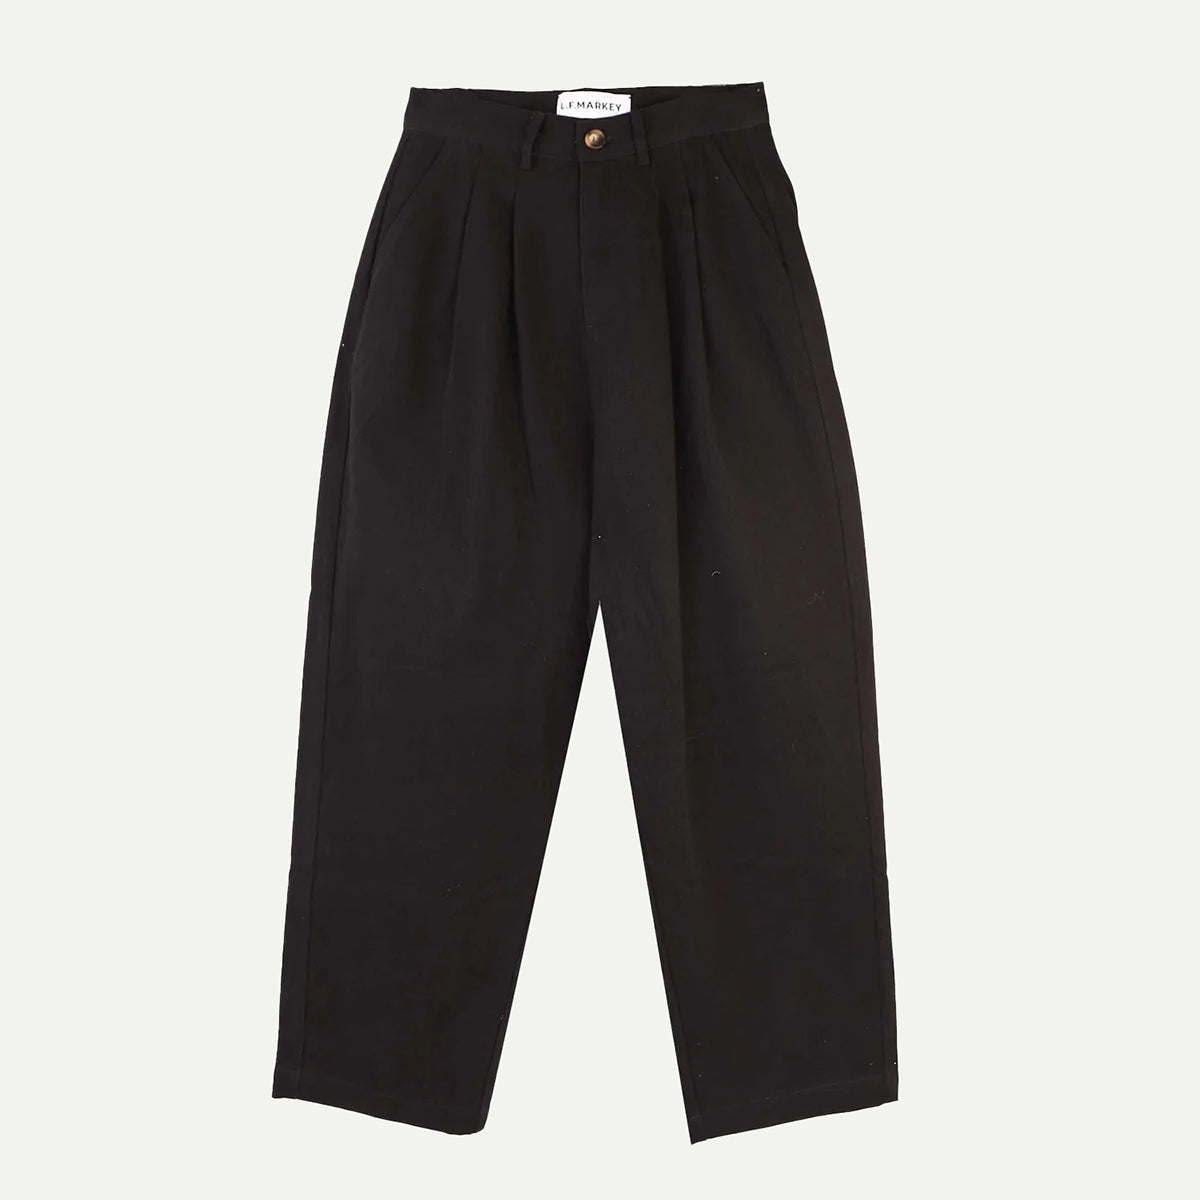 Women's Trousers, Jeans, Shorts & Skirts | Roo's Beach